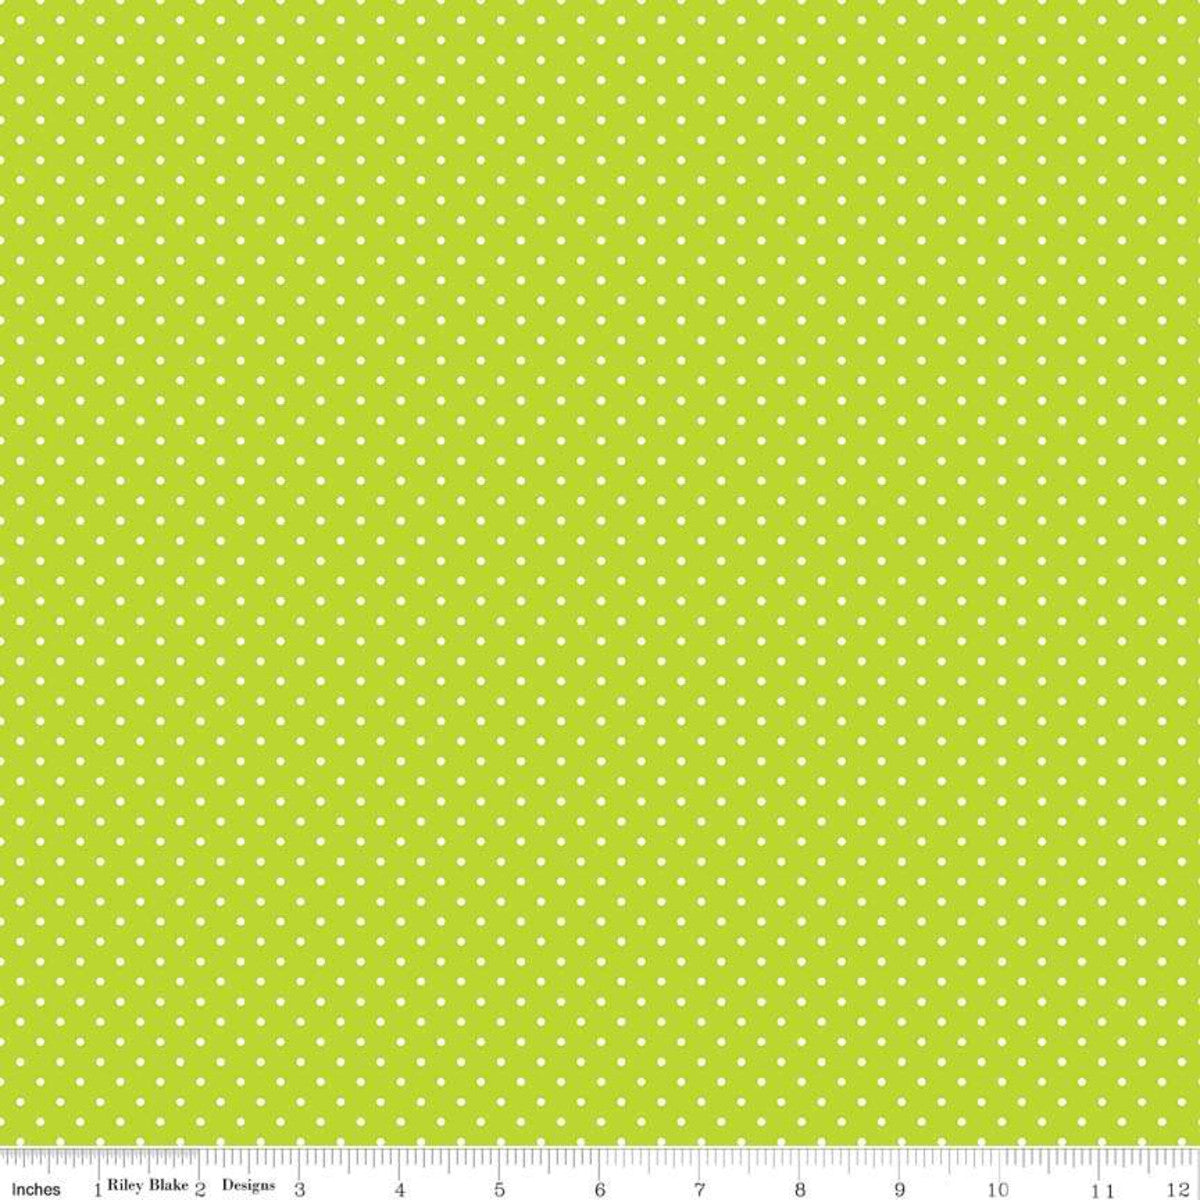 White Swiss (Polka) Dots - Lime Background Fabric, 100% Cotton, Ref. C670-32 LIME, Swiss Dots Collection by Riley Blake Designs®